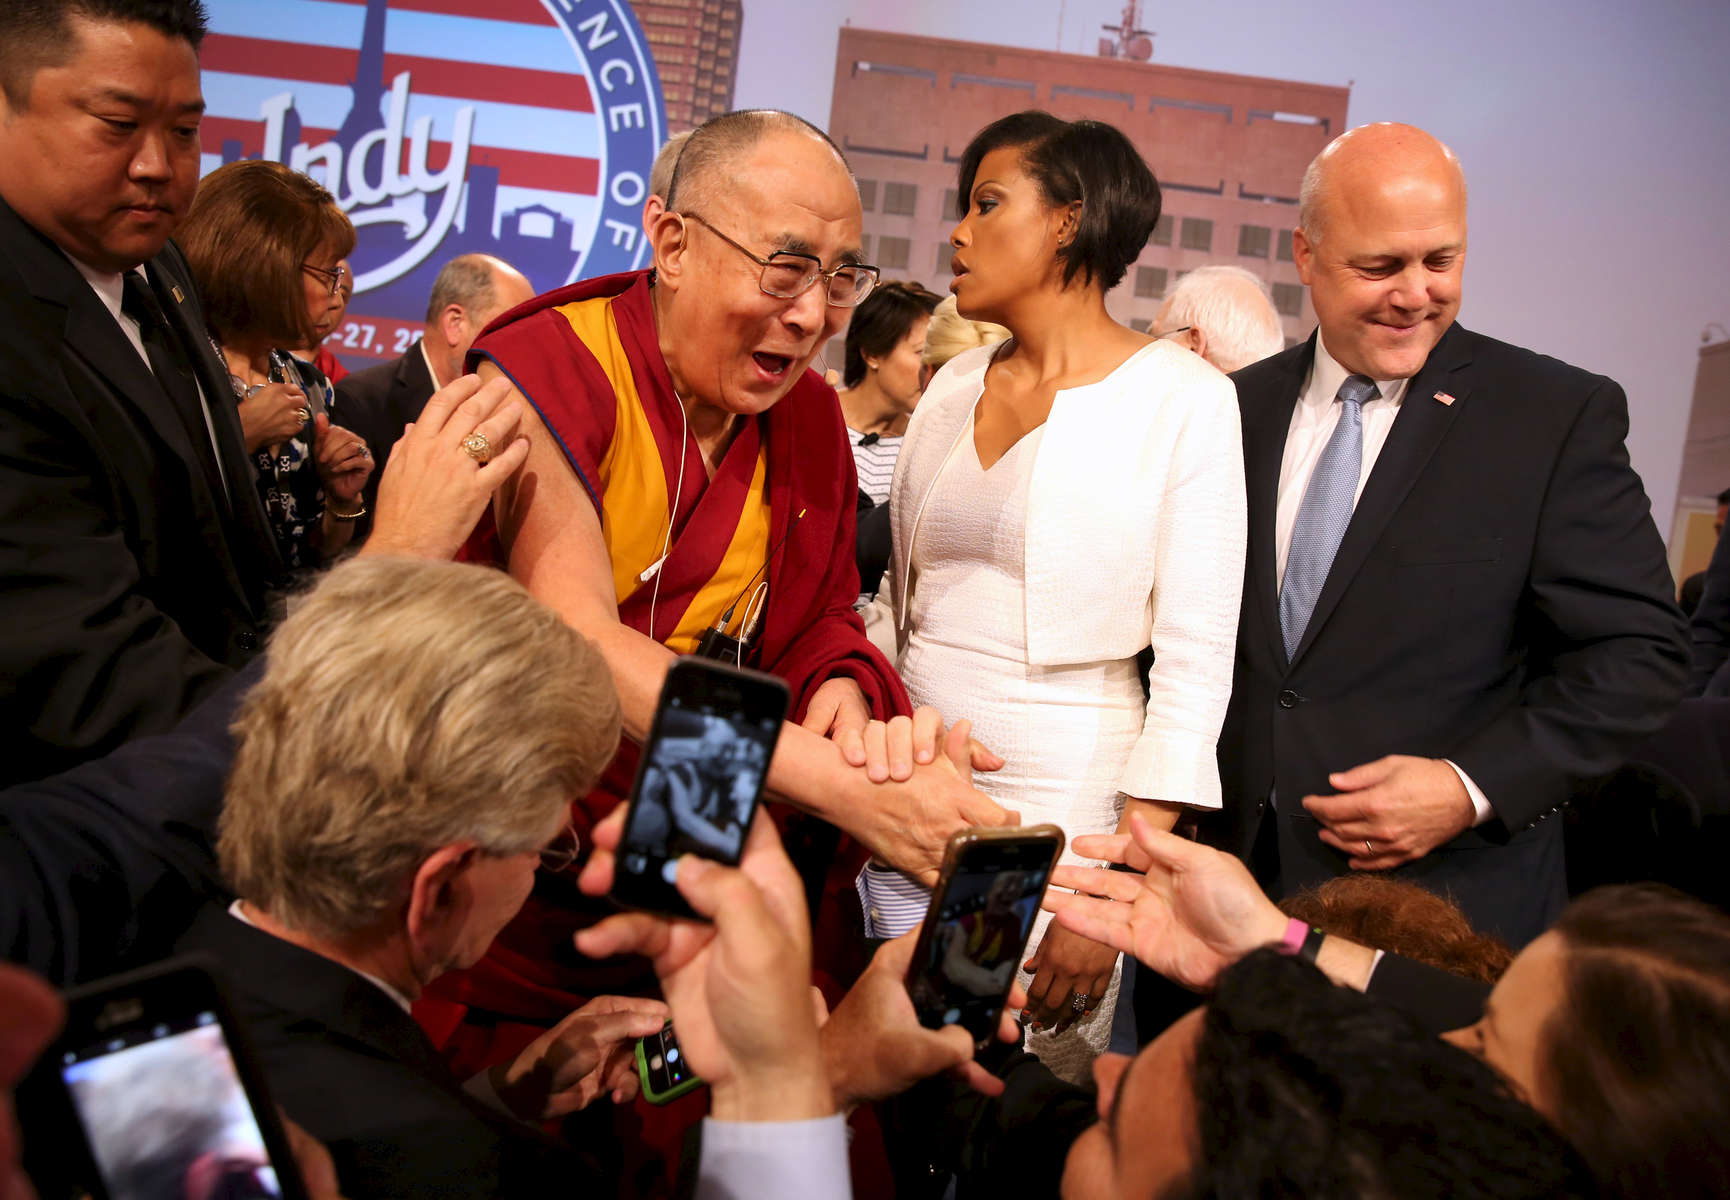 The Dalai Lama meets mayors from around the country during The United States Conference of Mayors in Indianapolis, Indiana Sunday June 26, 2016. 